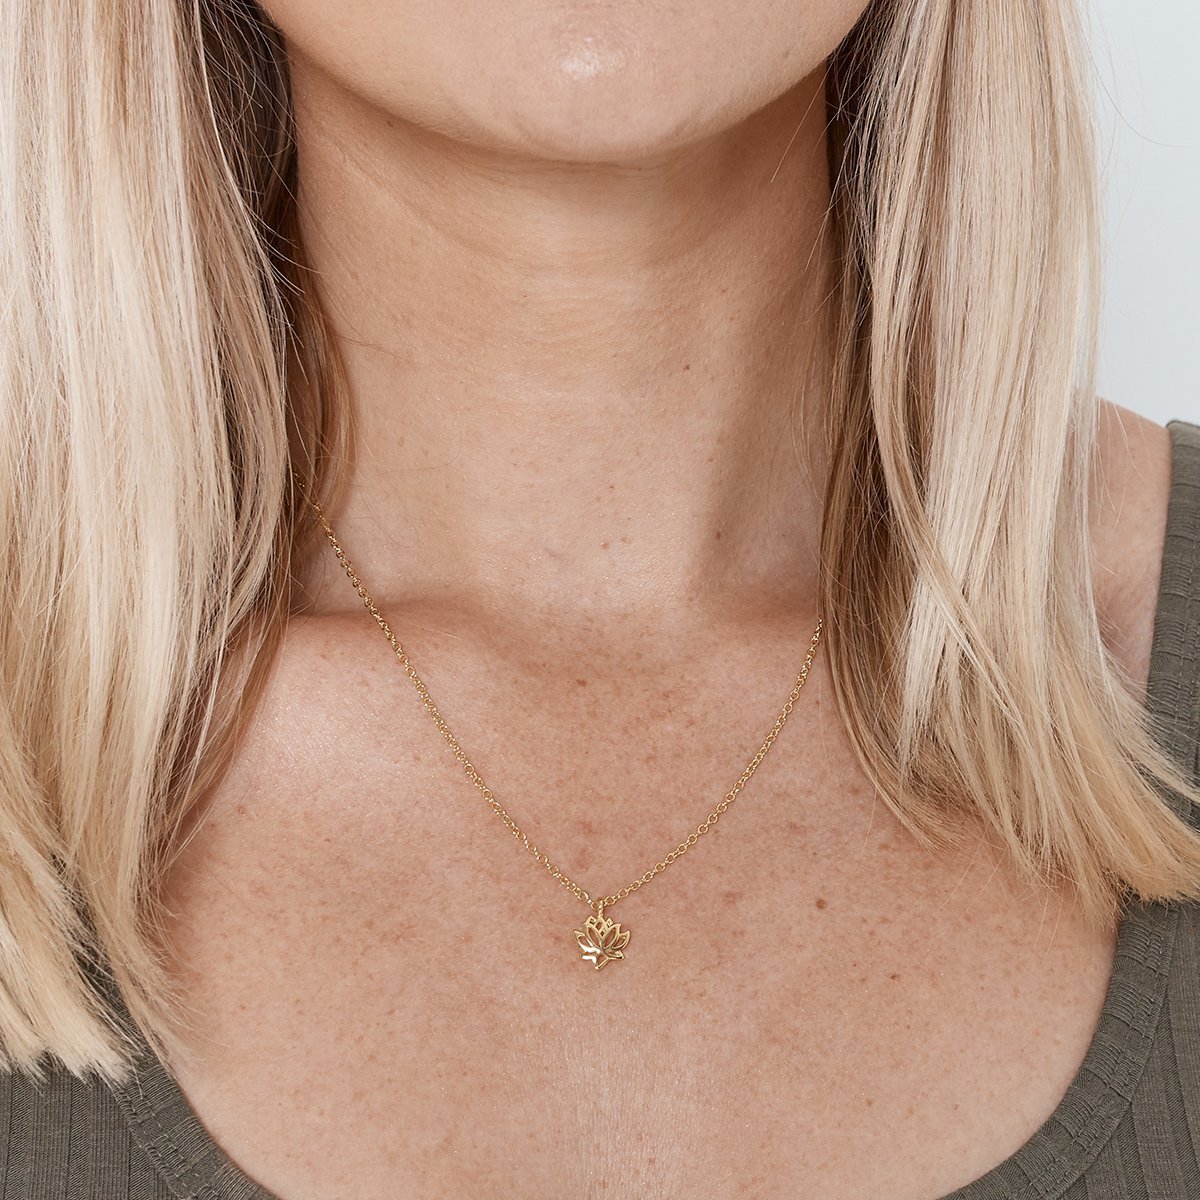 Gifts for Women with Cancer Lotus Necklace